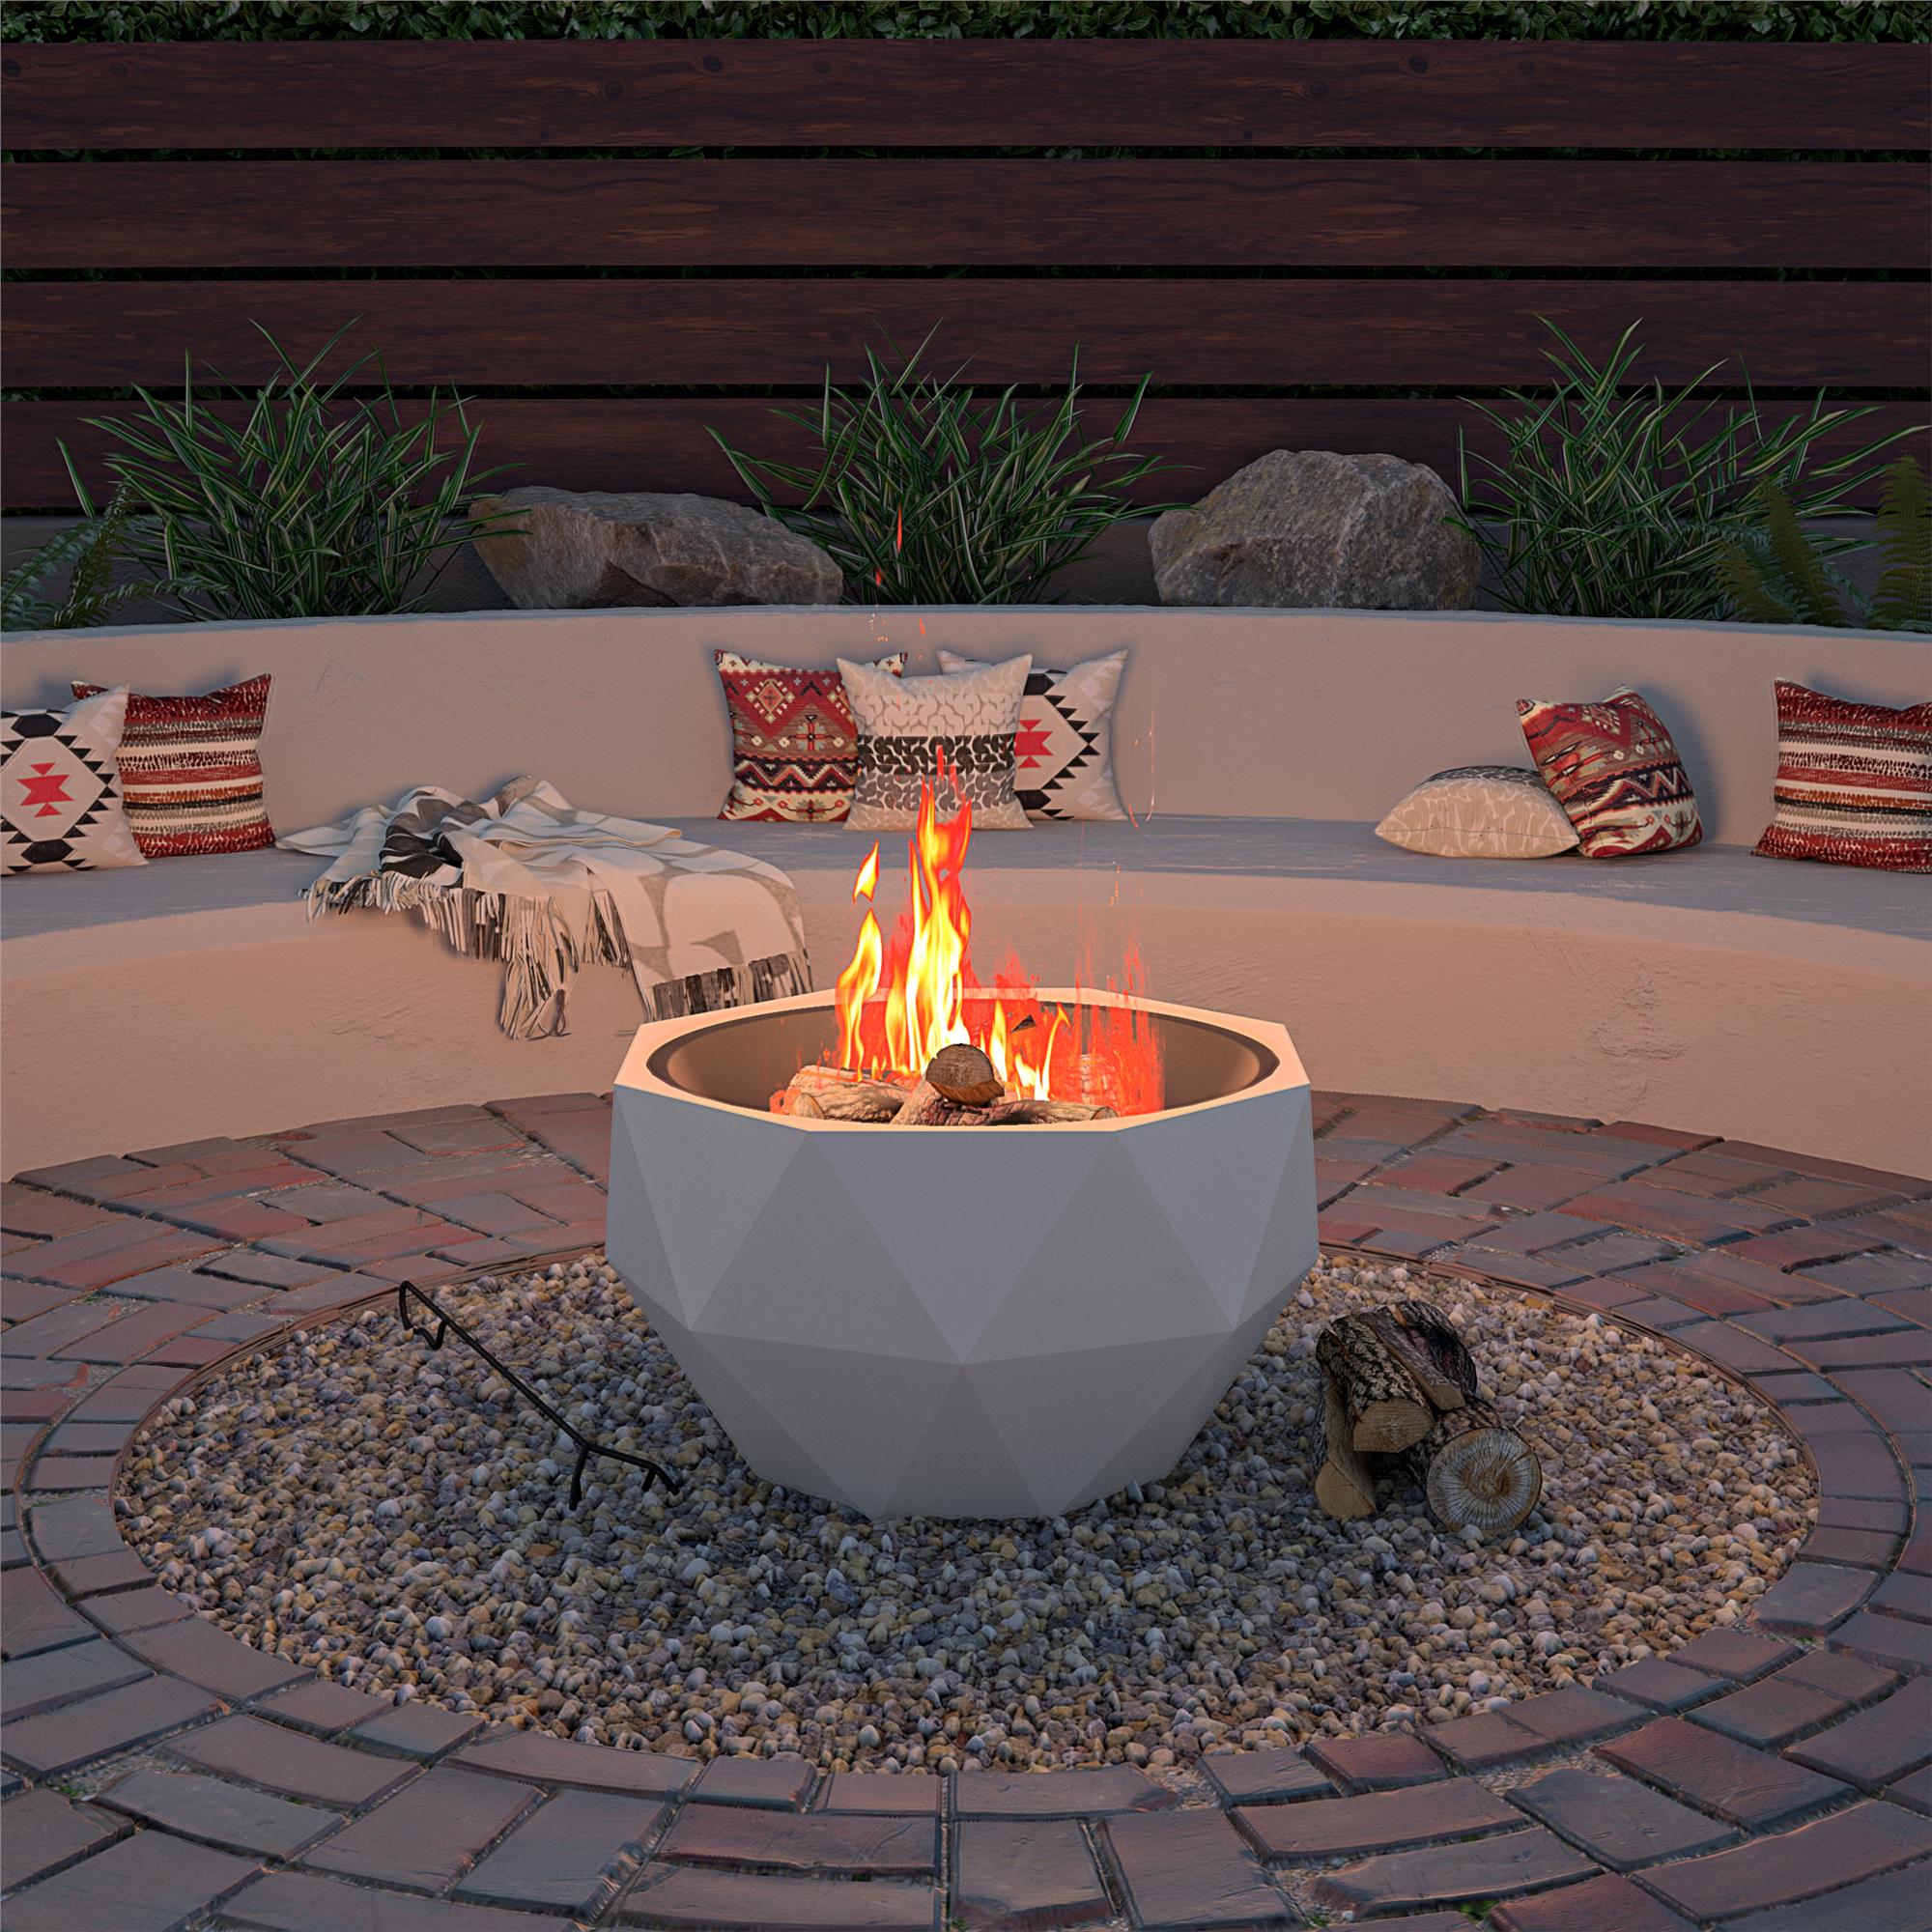 Outdoor 25" Geo Wood Burning Fire Pit - White